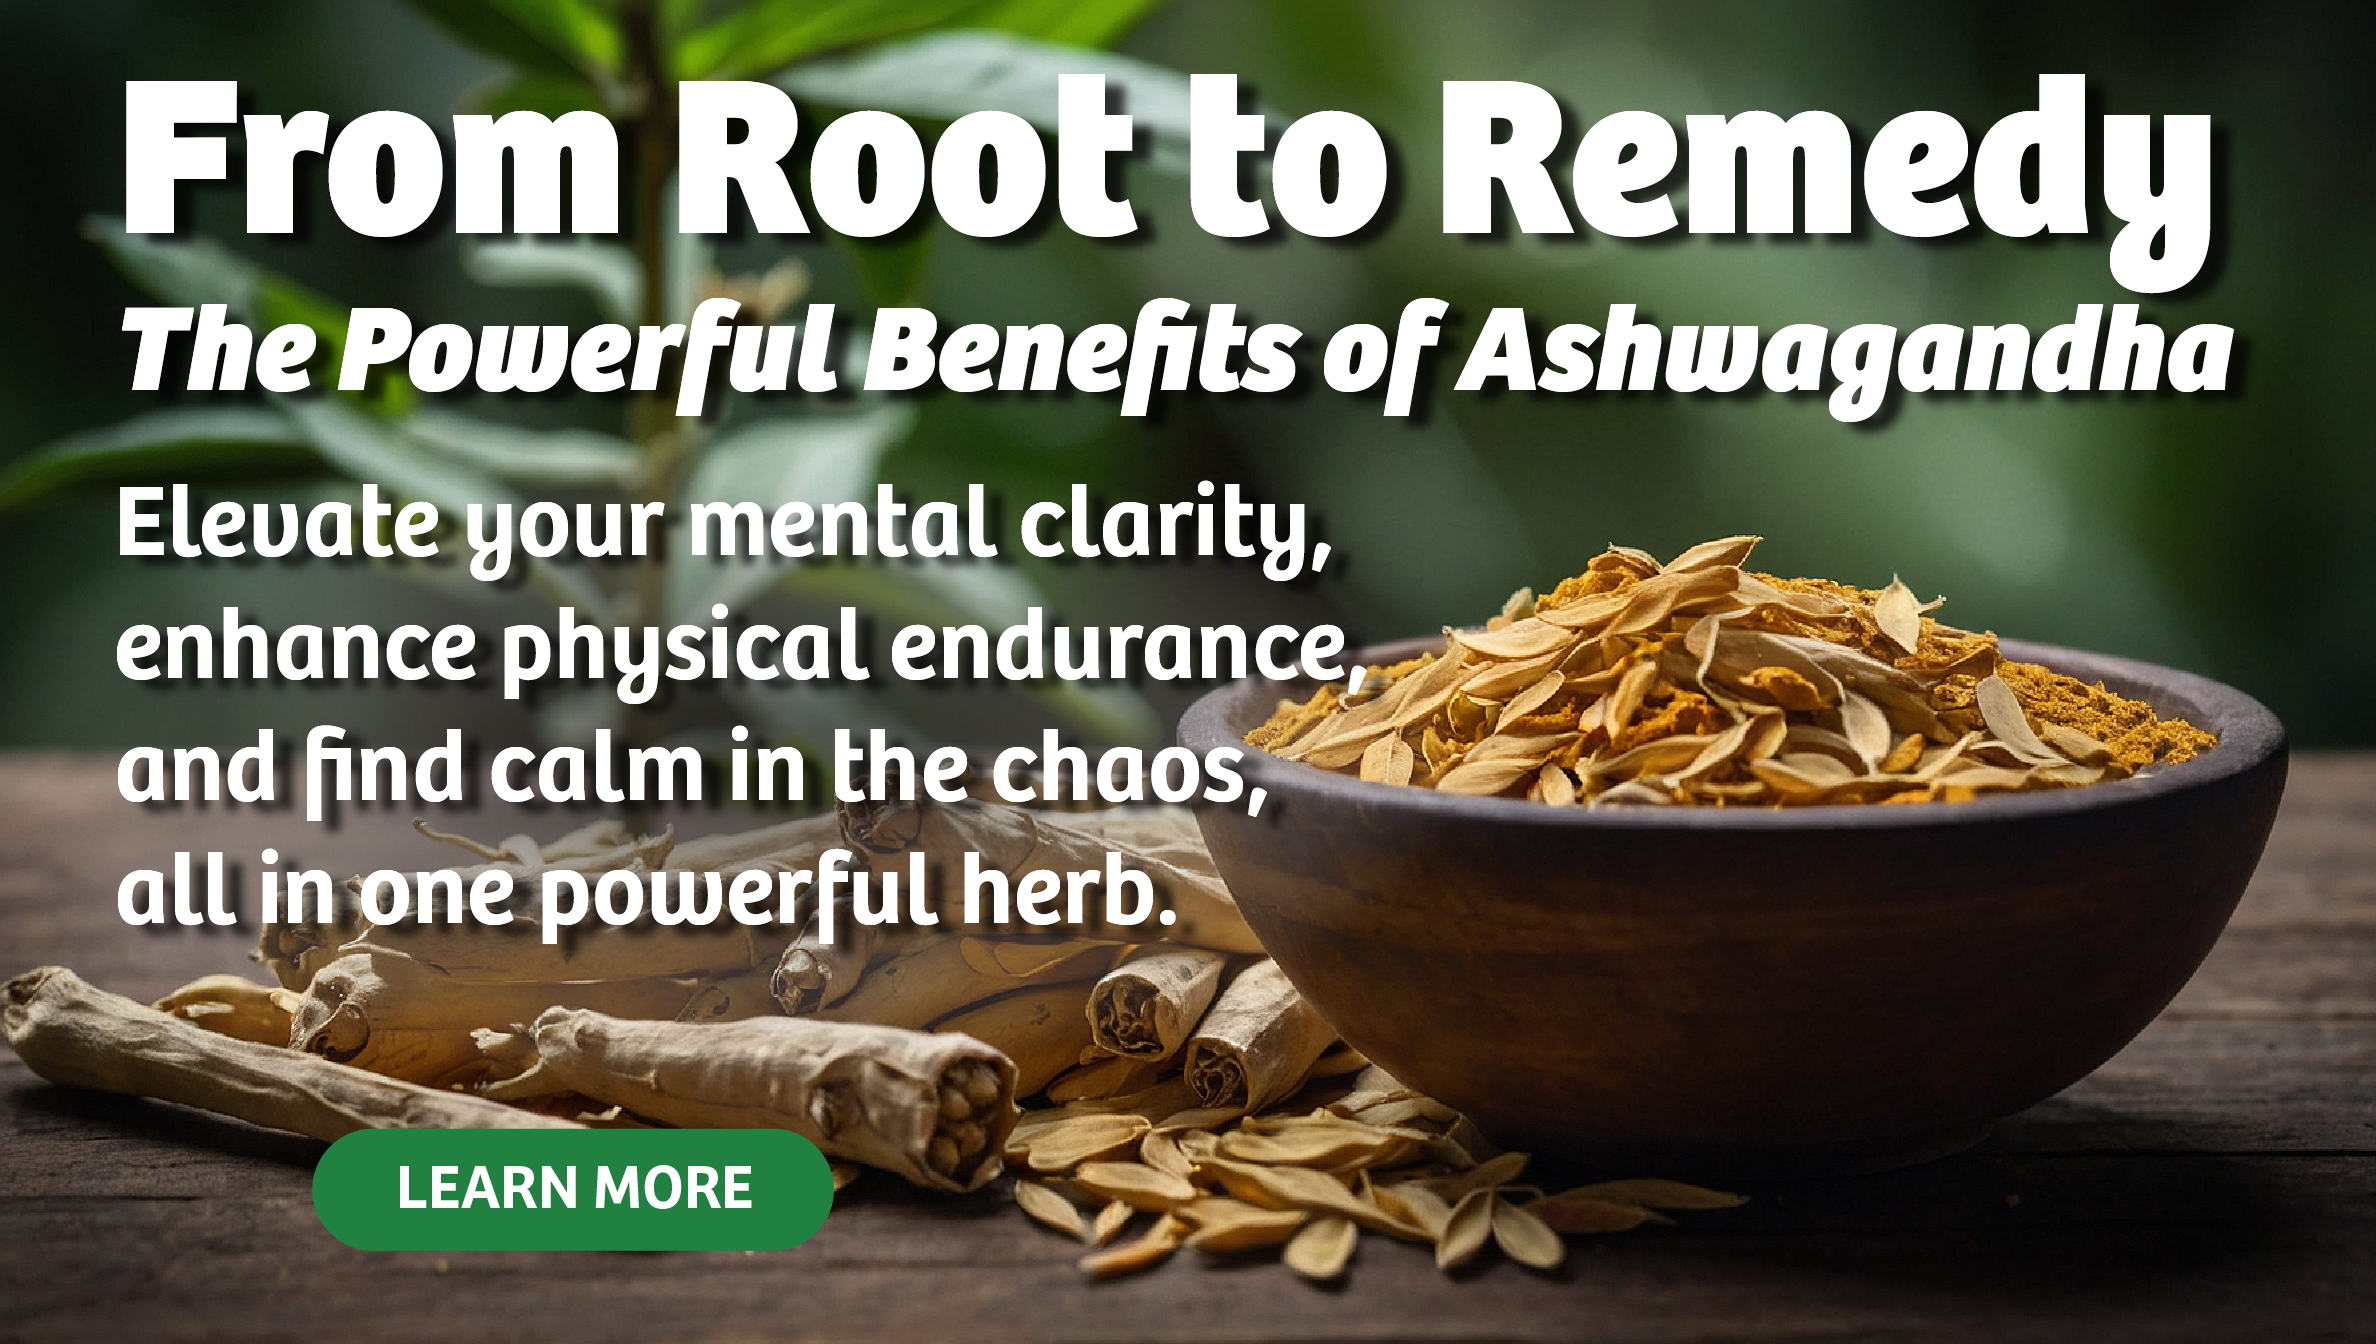 From Root to Remedy: The Powerful Benefits of Ashwagandha